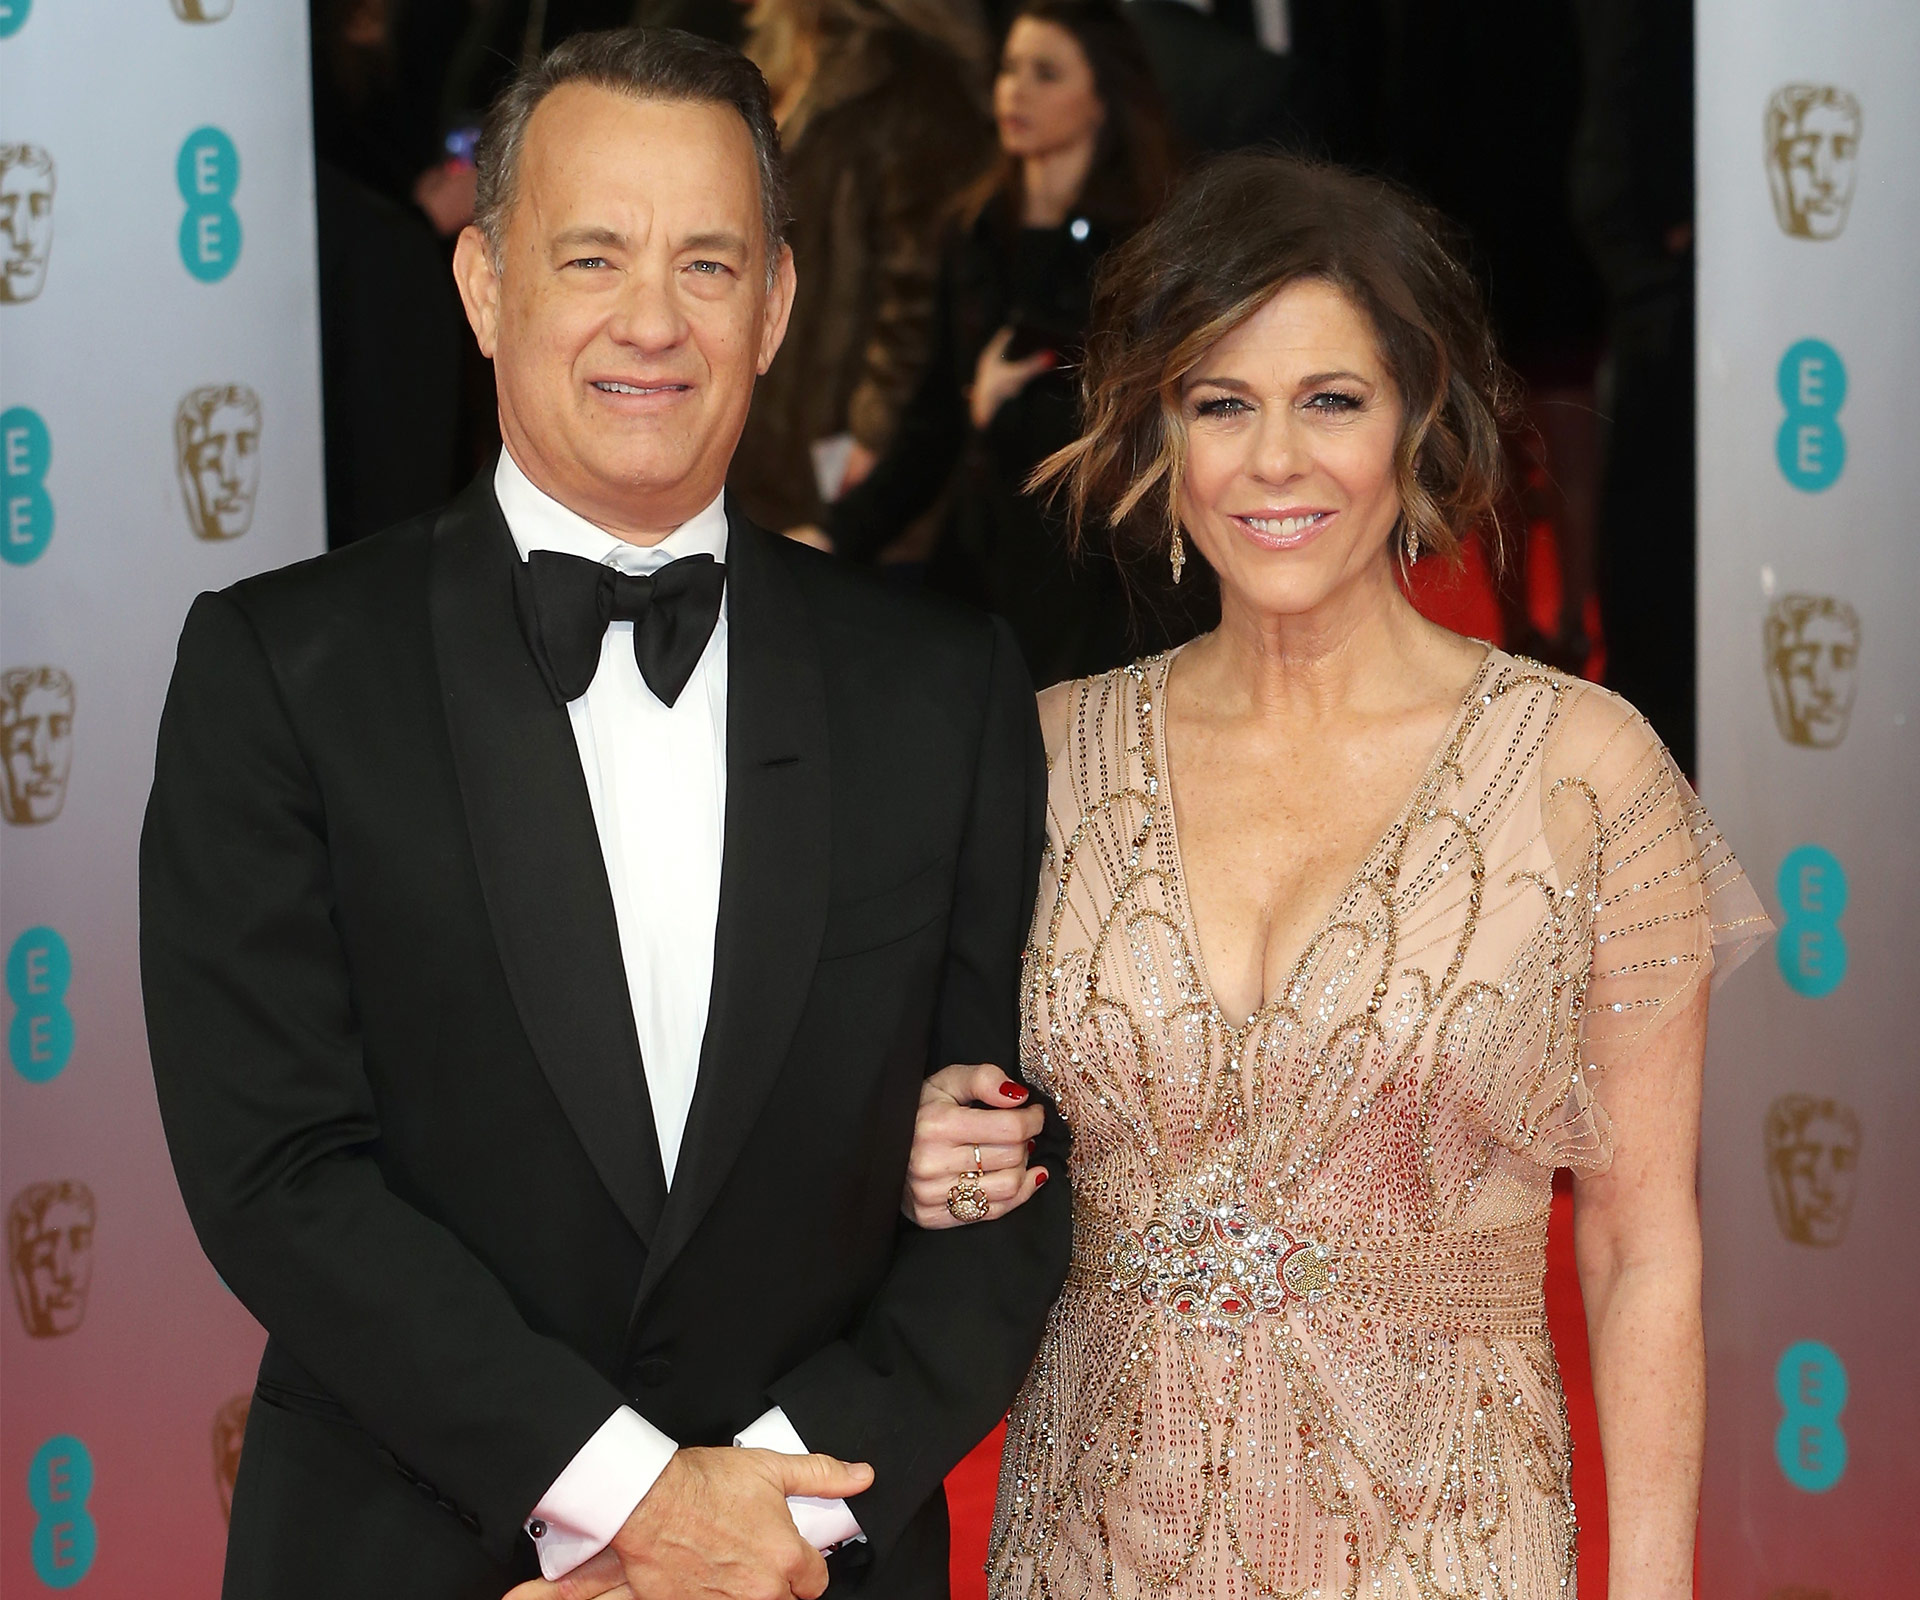 Rita Wilson reveals she had double mastectomy after cancer diagnosis